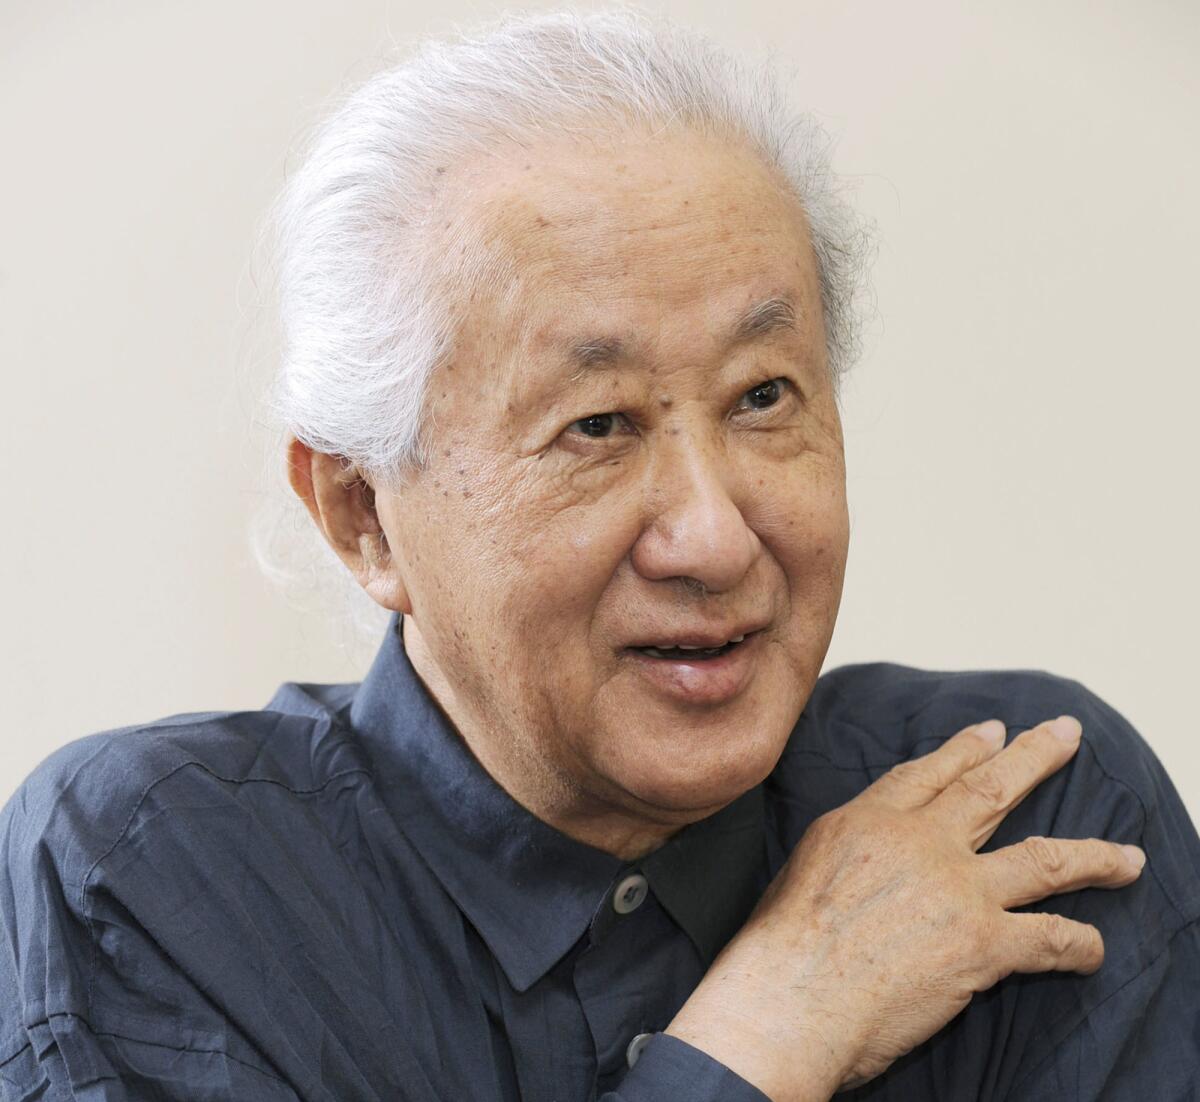 FILE- Architect Arata Isozaki is interviewed in 2013. Isozaki, a Pritzker-winning Japanese architect known as a post-modern giant who blended culture and history of the East and the West in his designs, has died of old age. He was 91. (Kyodo News via AP, File)